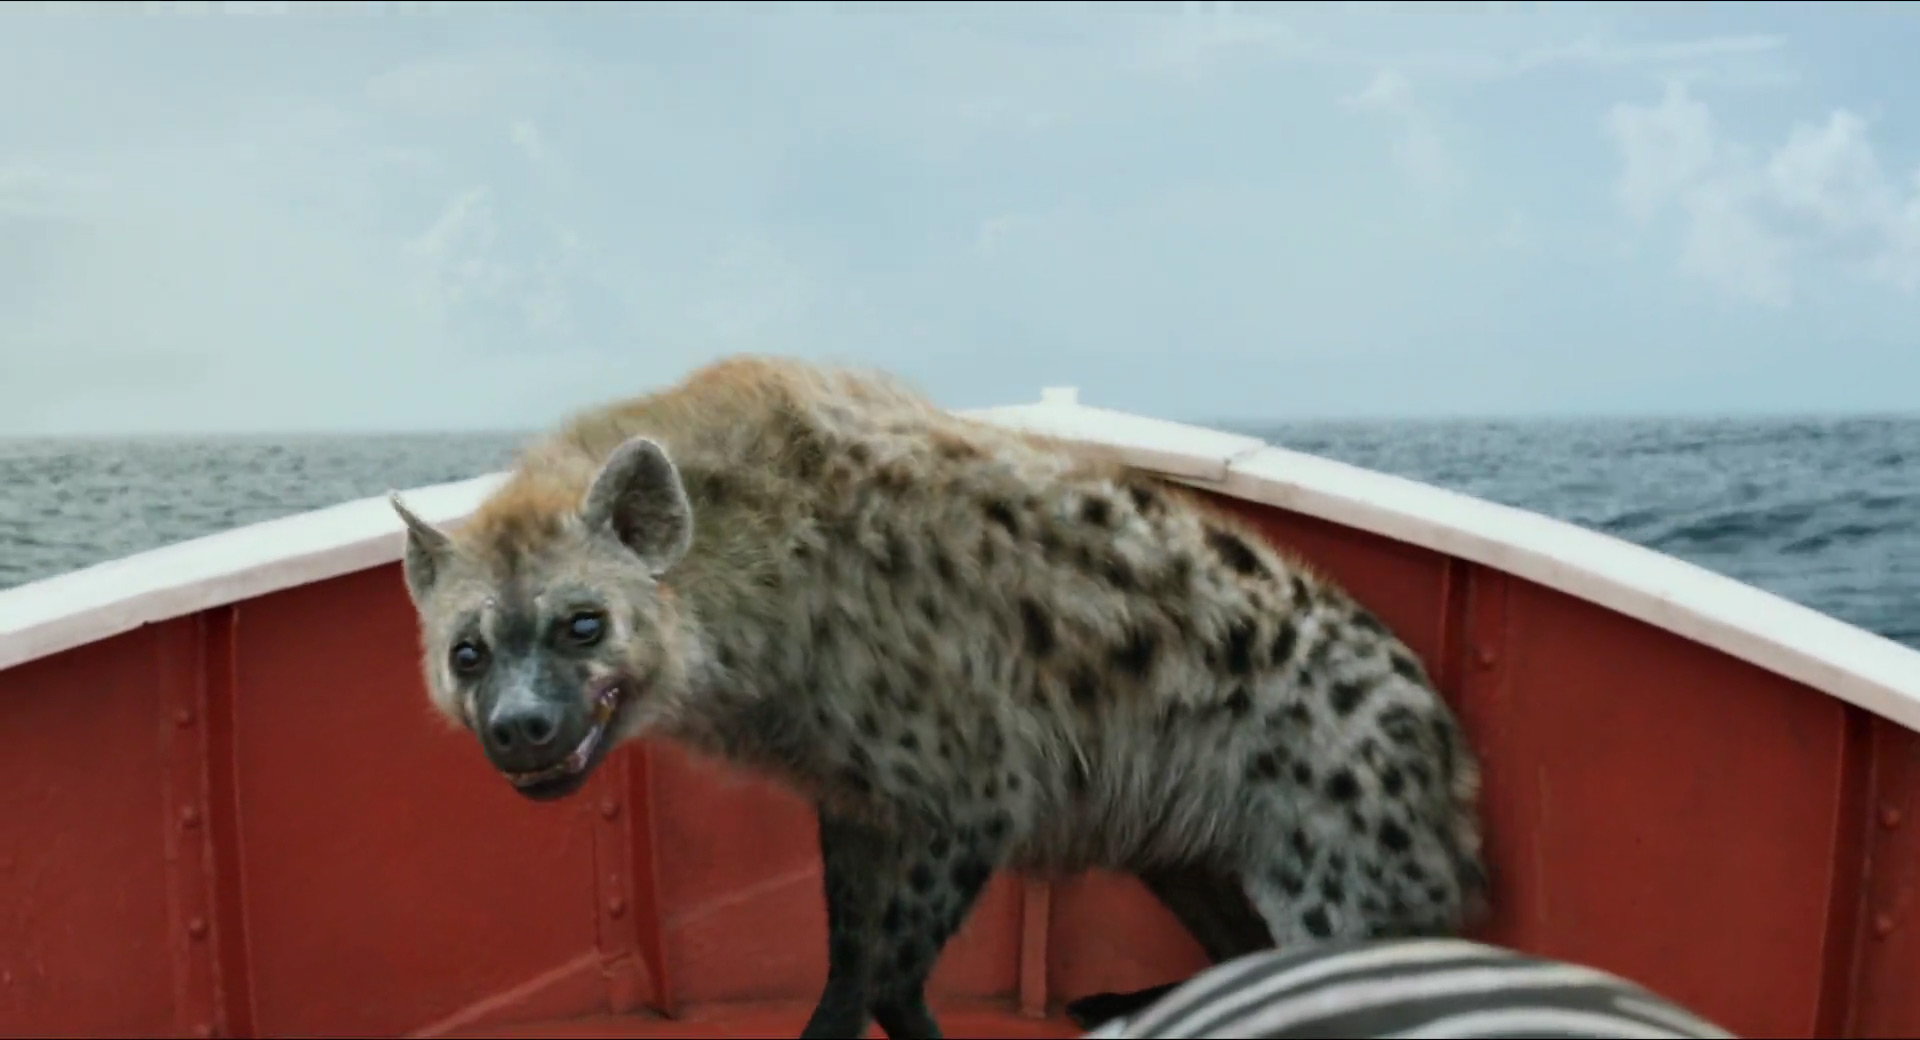 what does the hyena represent in life of pi